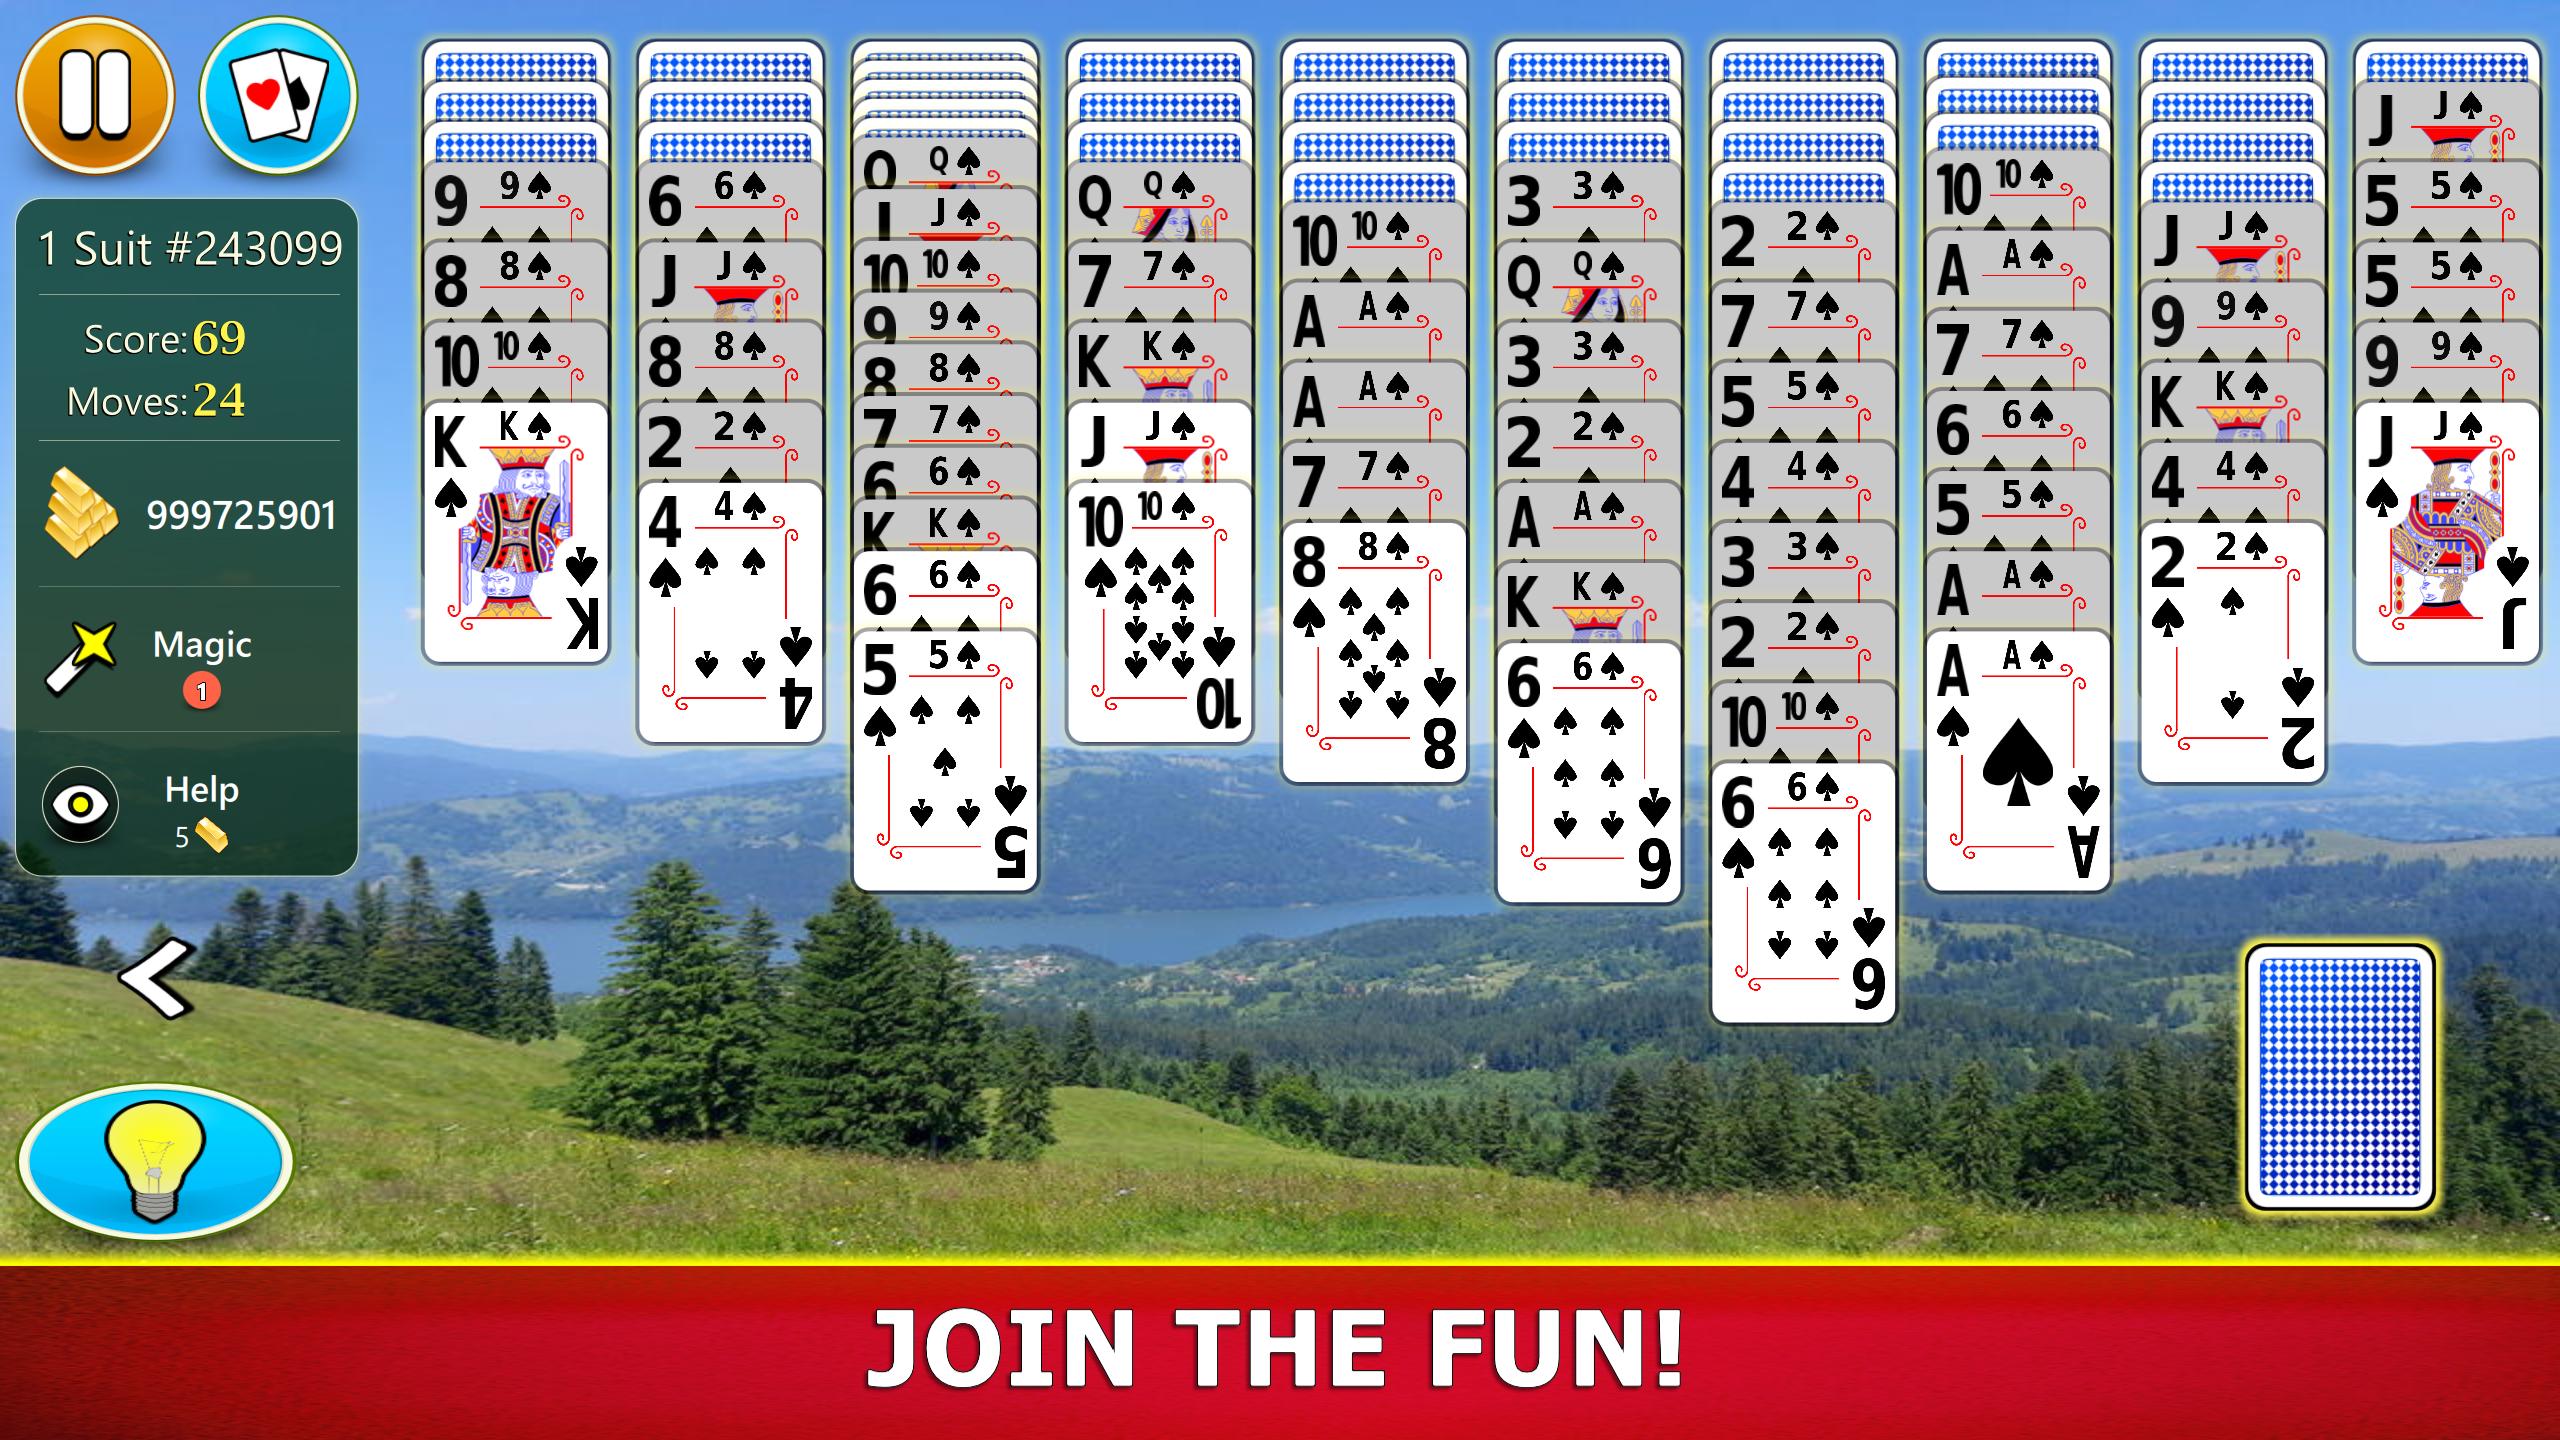 Android application Spider Solitaire Mobile screenshort